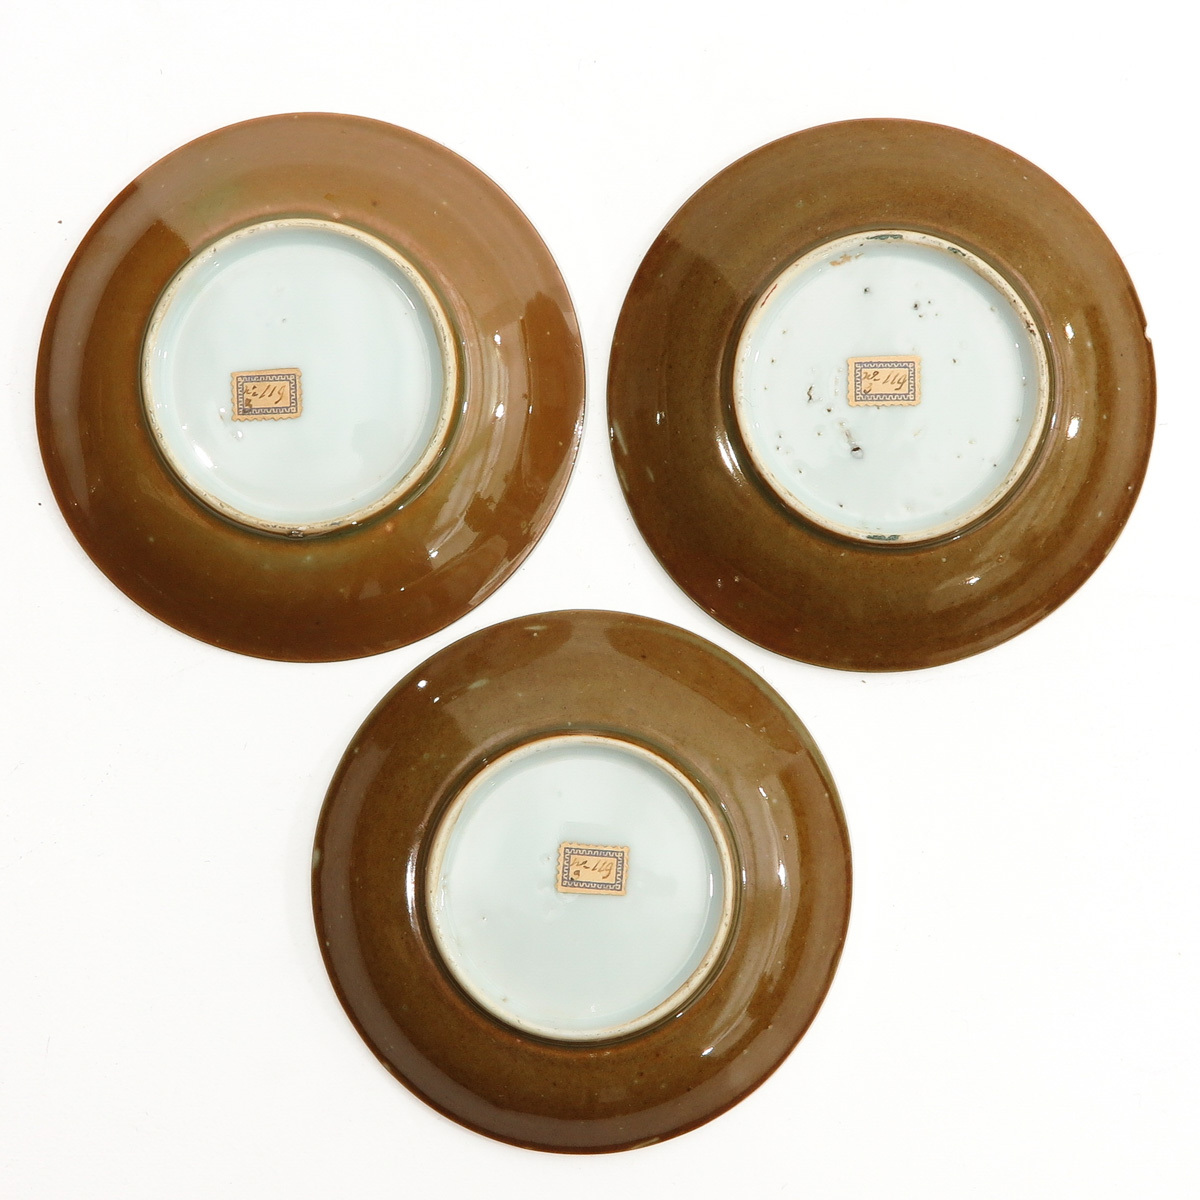 A Set of 3 Cups and Saucers - Image 8 of 10